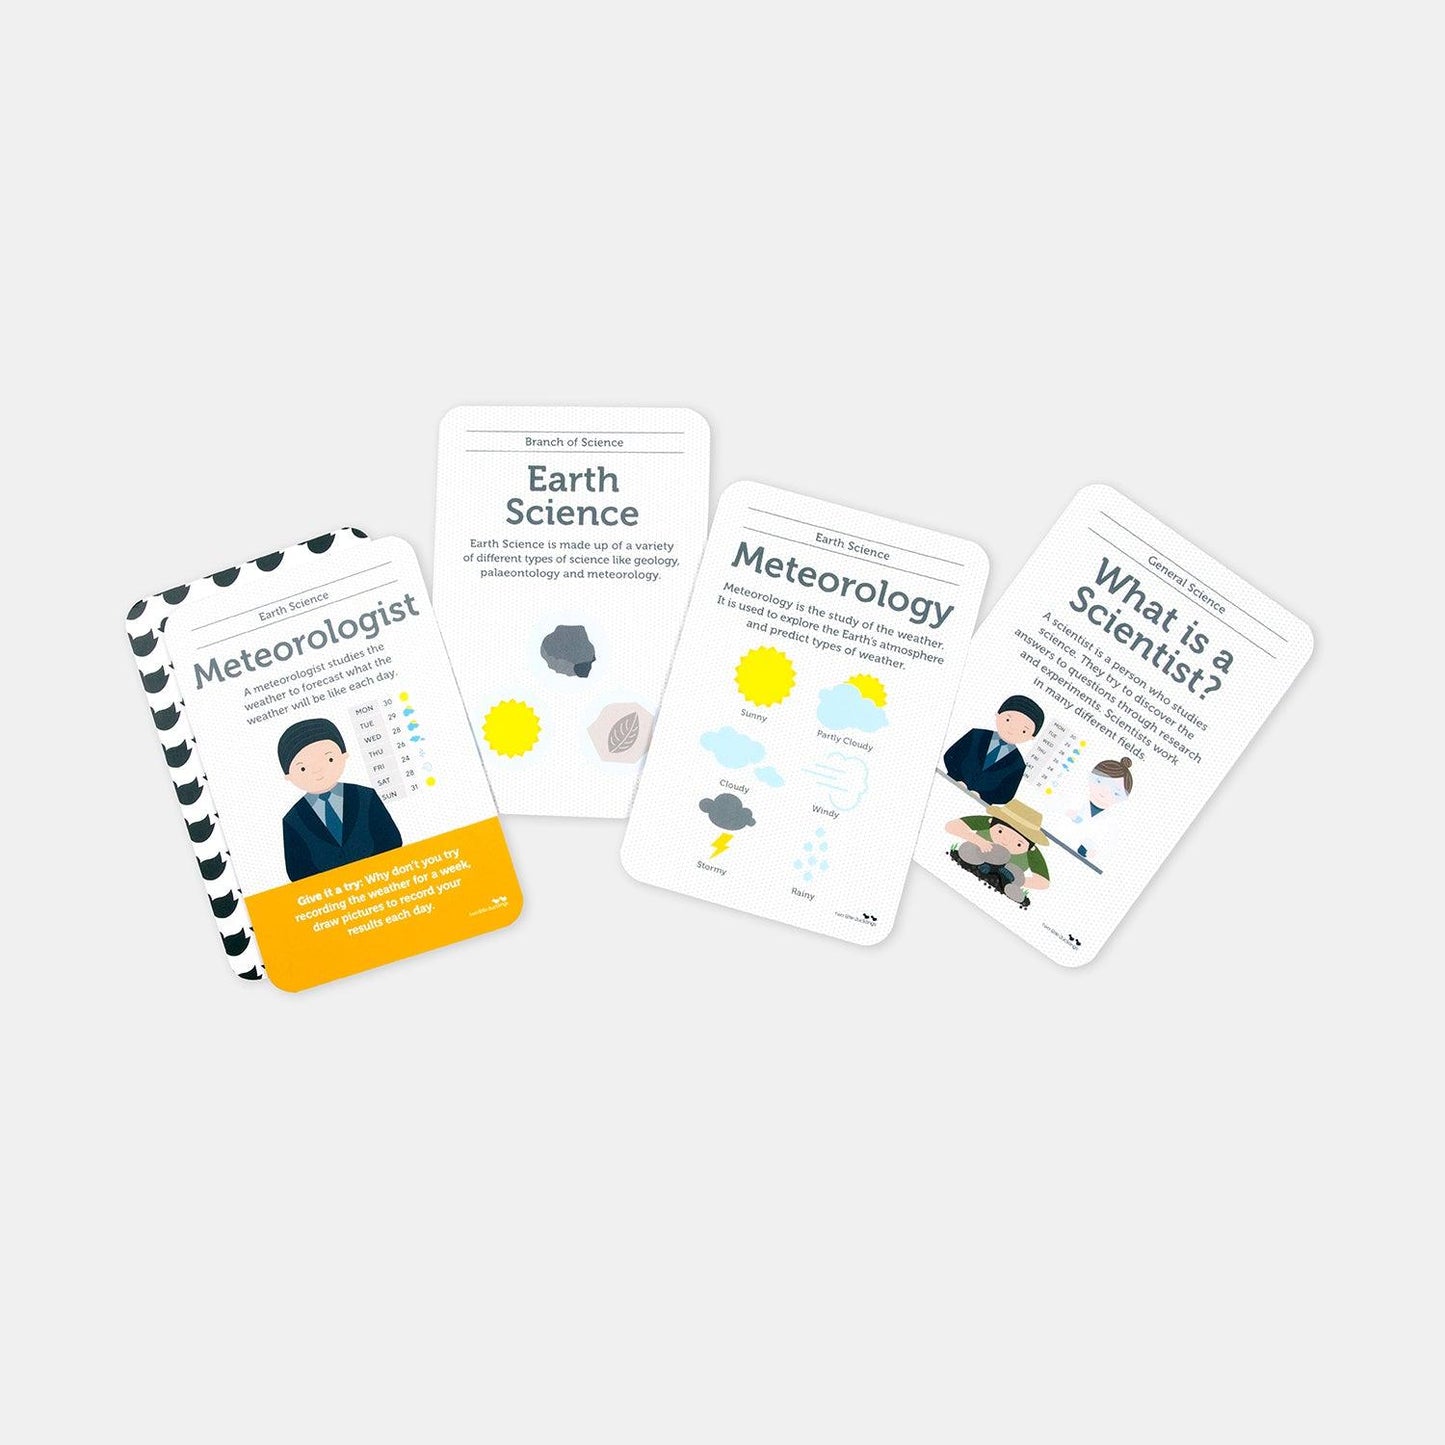 Interactive Science Learning Flash Cards for Kids